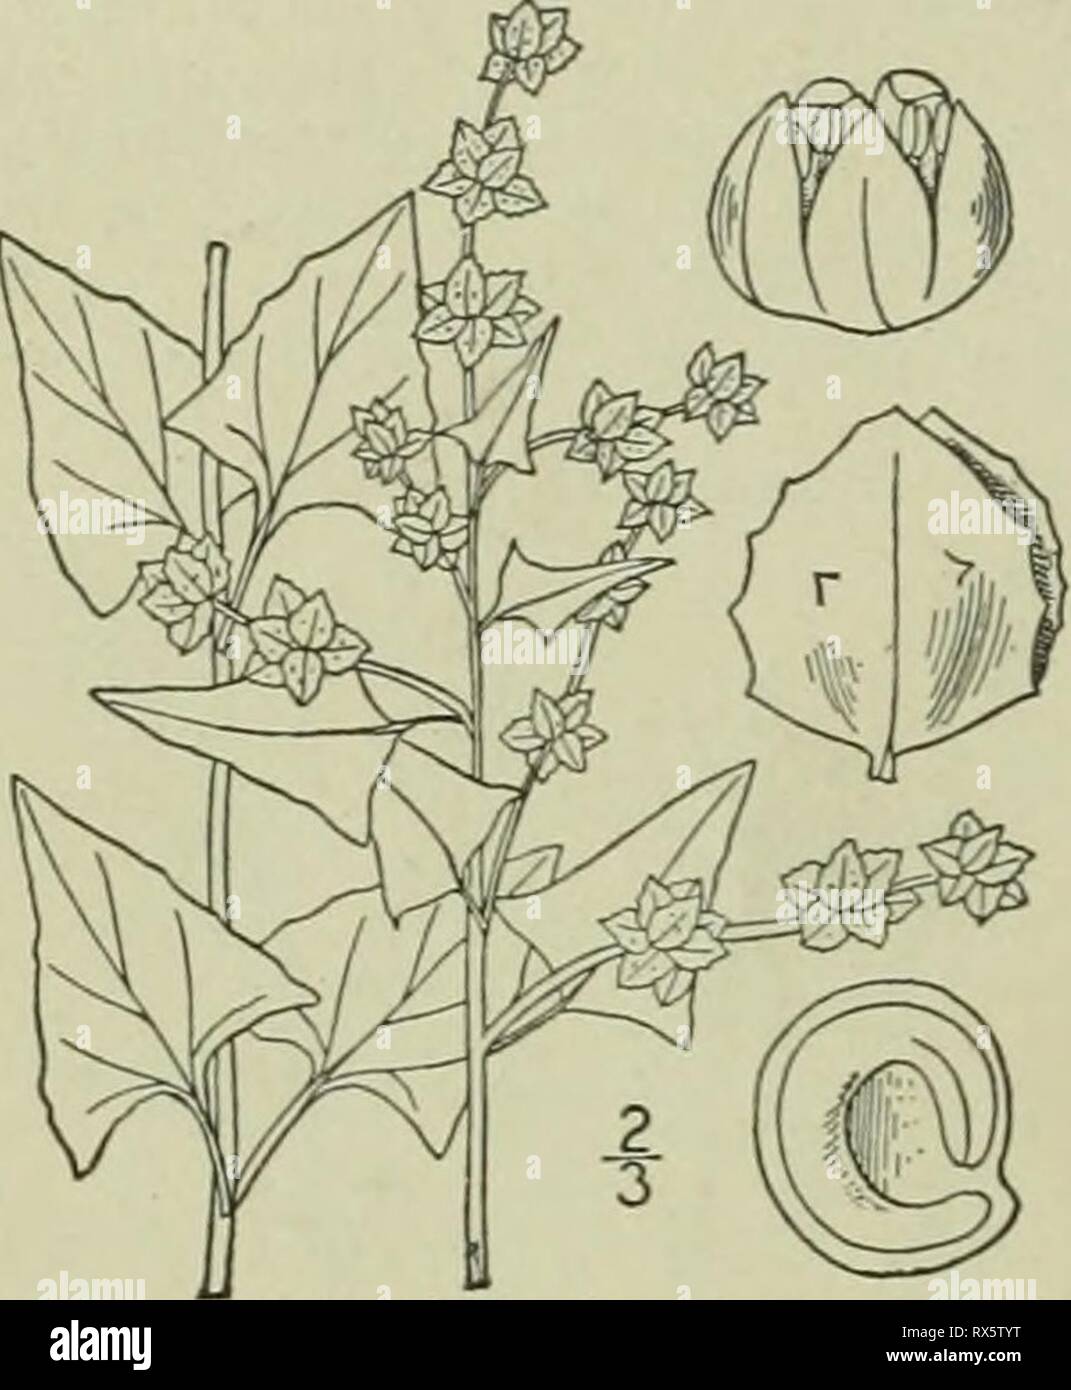 An illustrated flora of the An illustrated flora of the northern United States, Canada and the British possessions : from Newfoundland to the parallel of the southern boundary of Virginia and from the Atlantic Ocean westward to the 102nd meridian ed2illustratedflo02brit Year: 1913  CHEXOPODIACEAE. I. Atriplex hastata L. Halberd-leaved Orache. Fig. 1697. Alriplex hastata L. Sp. PI. 1053. 1753. Atriplex patula L. Sp. PI. 1053. 1753. Atriplex liltoralis L. Sp. PI. 1054. 1753. A. patulum var. hastatum A. Gray, Man. Ed. 5, 409. Annual, green or purple, somewhat scurfy, at least when young; stems er Stock Photo